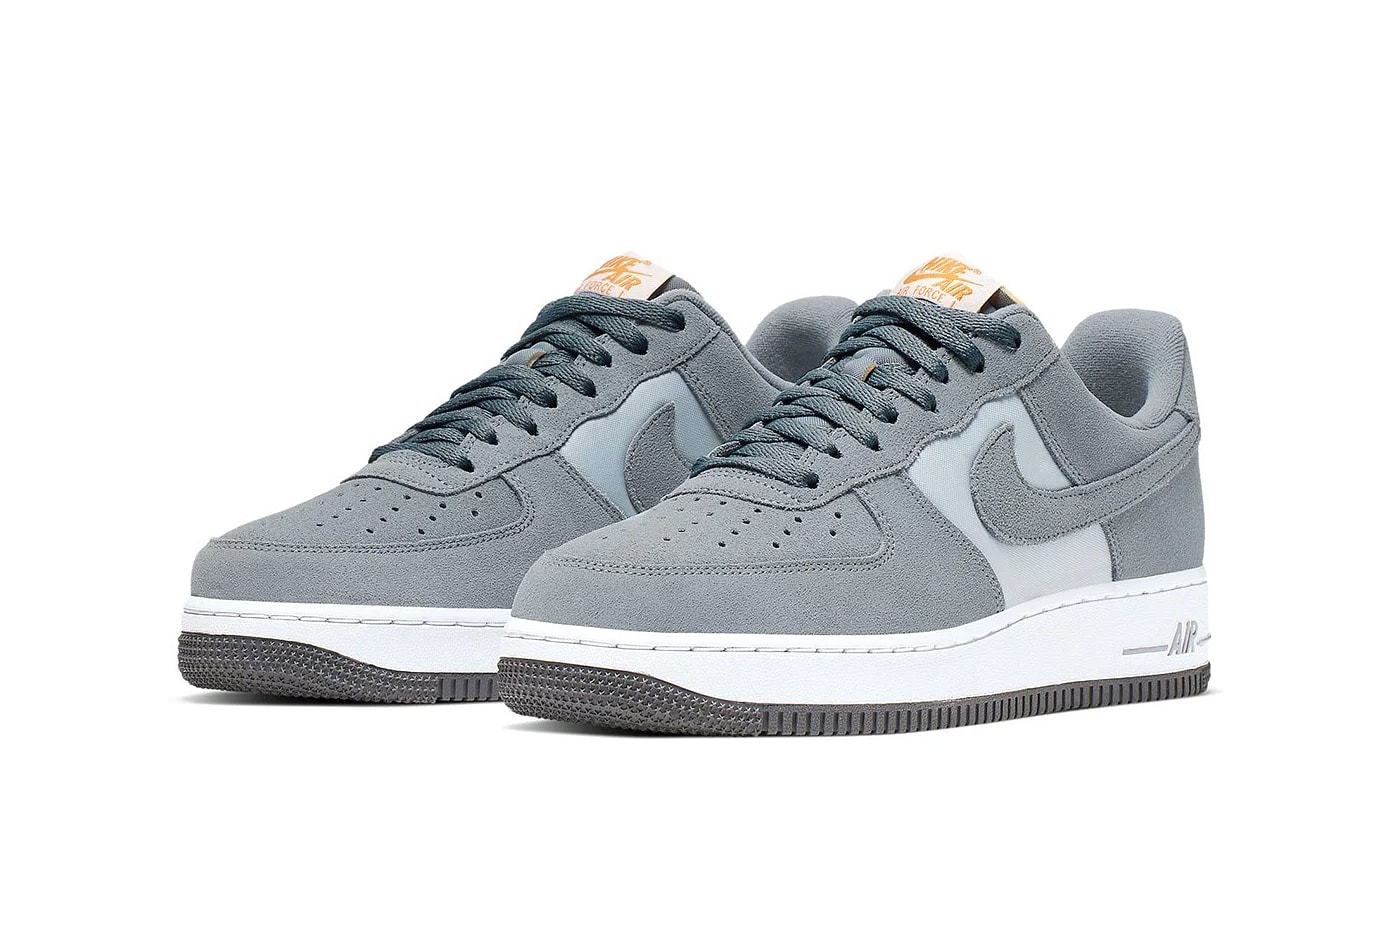 Nike Air Force 1 Cool Grey Release Info CI2677-002 Suede nubuck